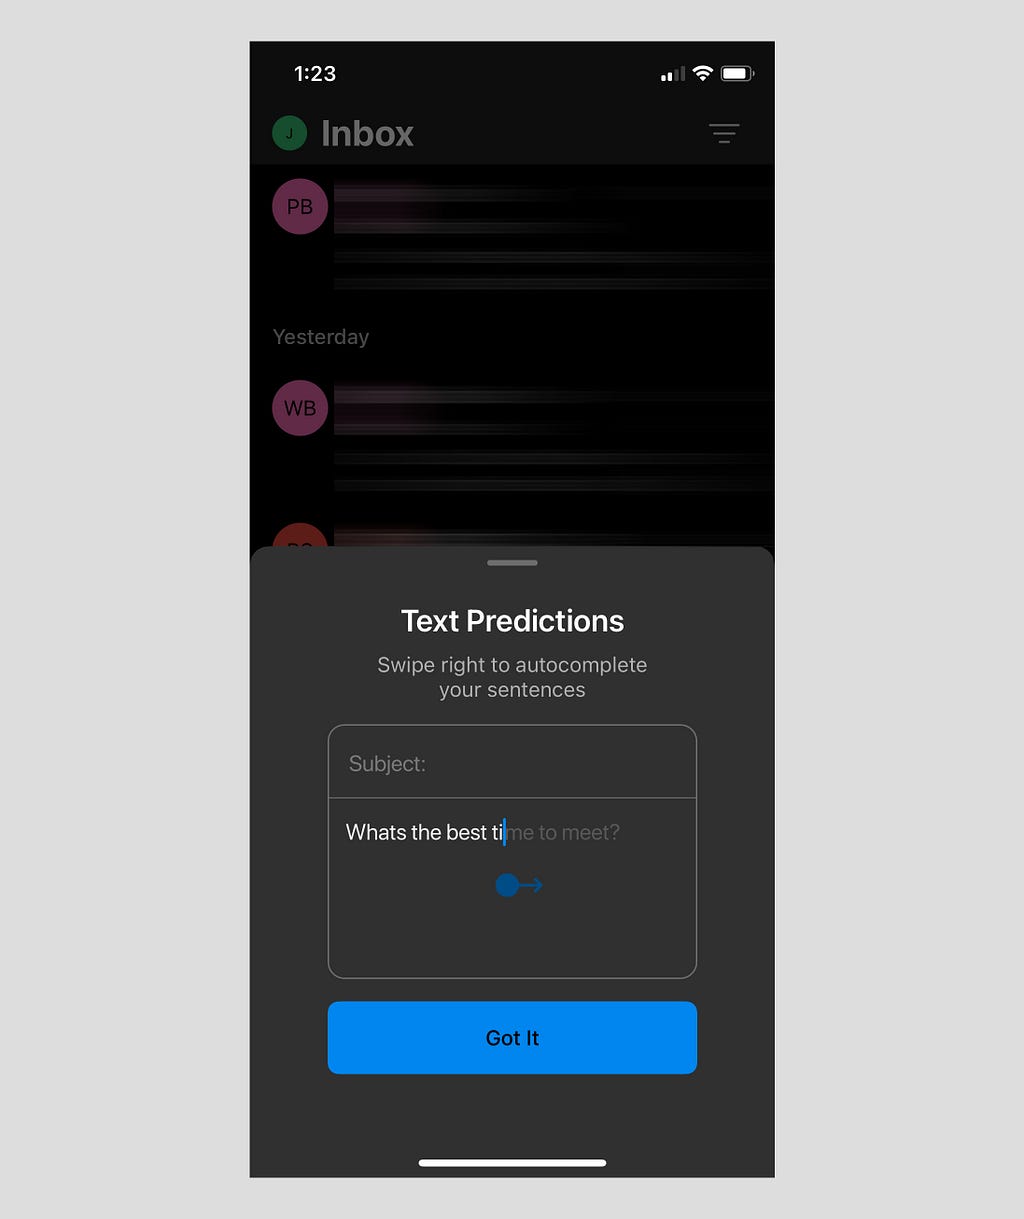 Microsoft Outlook app with Text Prediction UX writing text on display.